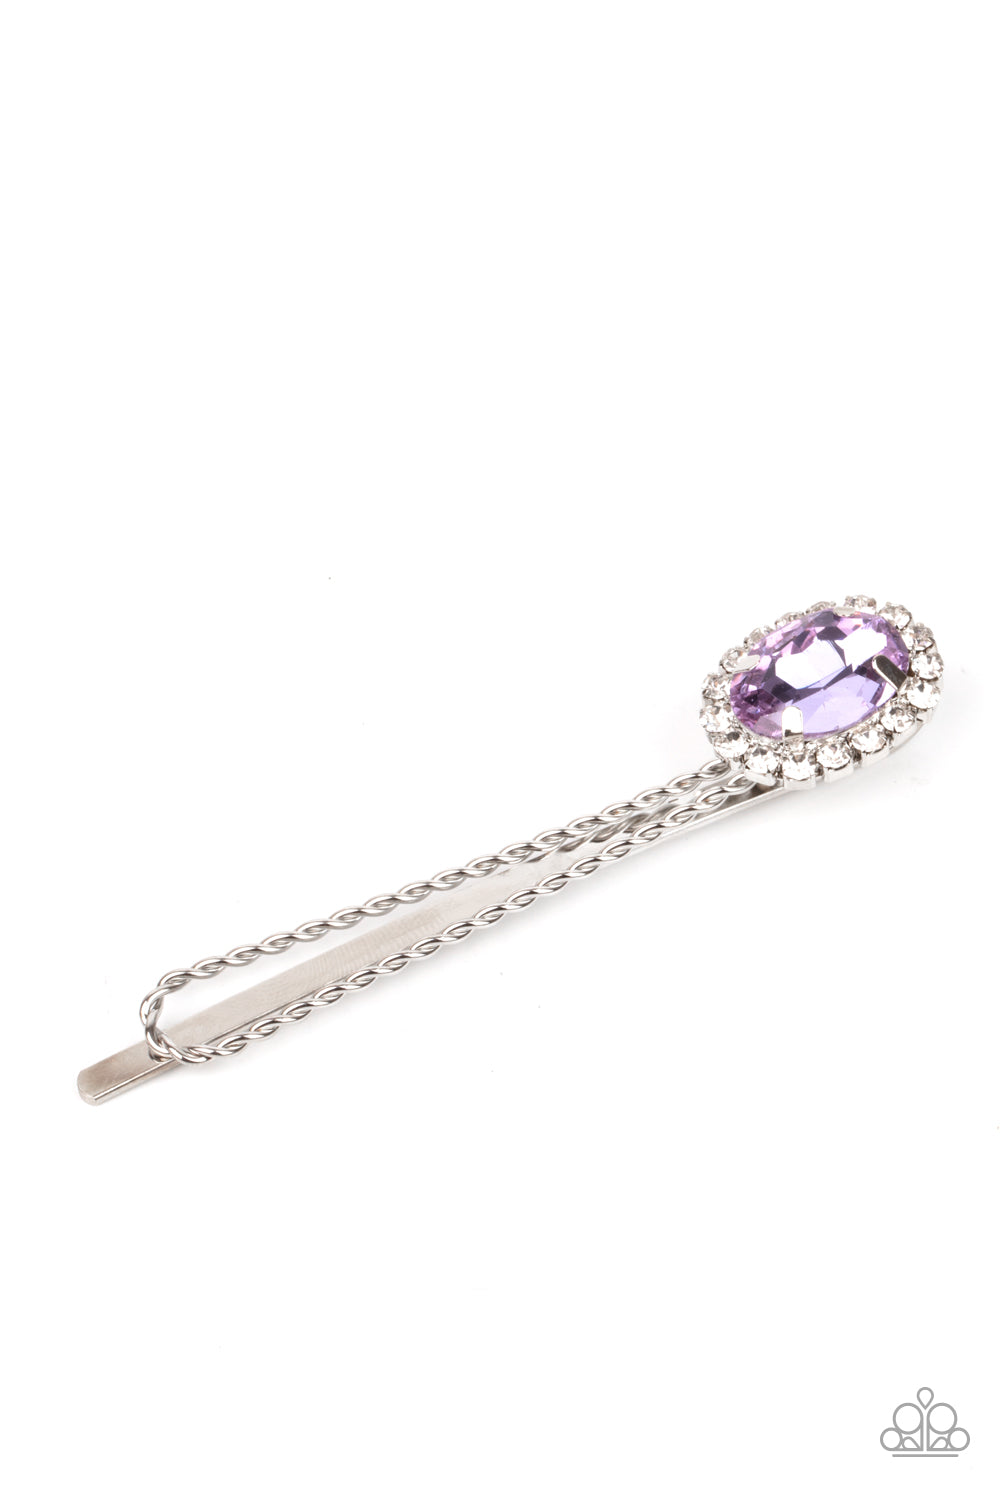 Gala Glitz Purple Hair Clip - Paparazzi Accessories  Bordered in a ring of glassy white rhinestones, an oval purple gem adorns the corner of a textured silver bobby pin for a glamorous finish.  All Paparazzi Accessories are lead free and nickel free!  Sold as one individual decorative bobby pin.